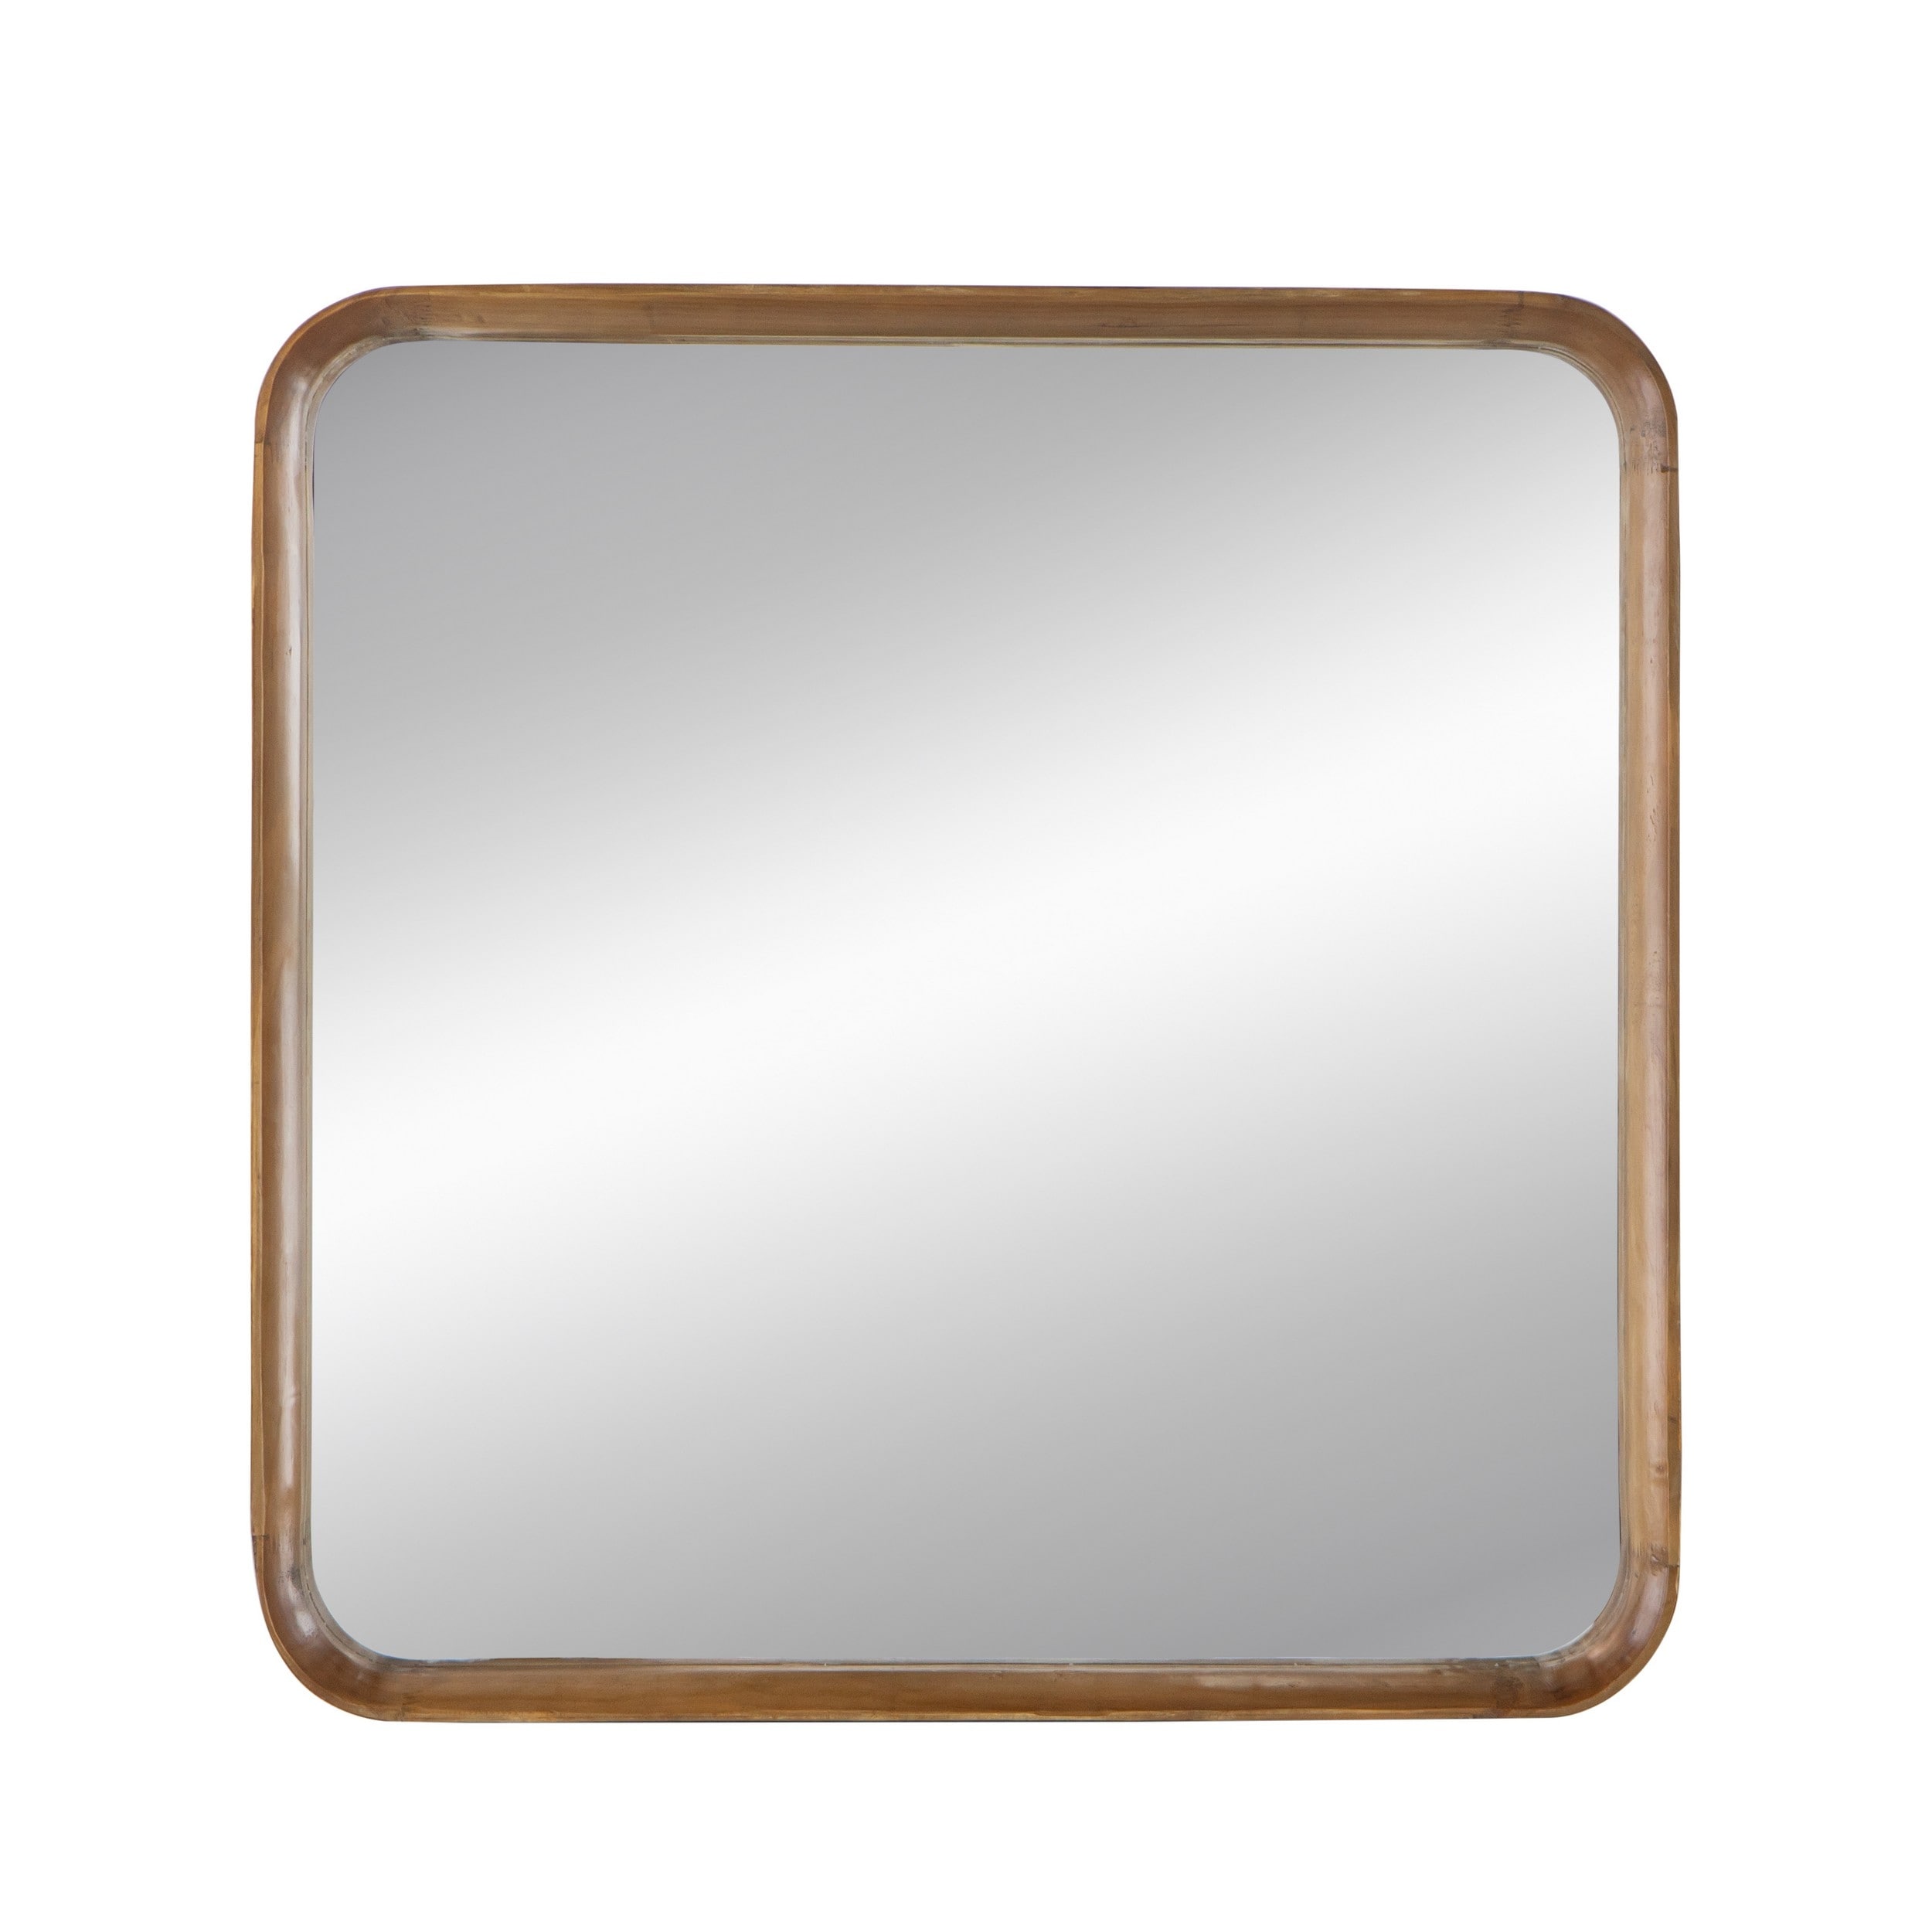 https://ak1.ostkcdn.com/images/products/is/images/direct/8fb1448cf50beb7c6a999357972e63ef78c0e6fd/Roe-32-Inch-Wall-Mirror%2C-Brown-Curved-Pine-Wood-Frame%2C-Minimalistic.jpg